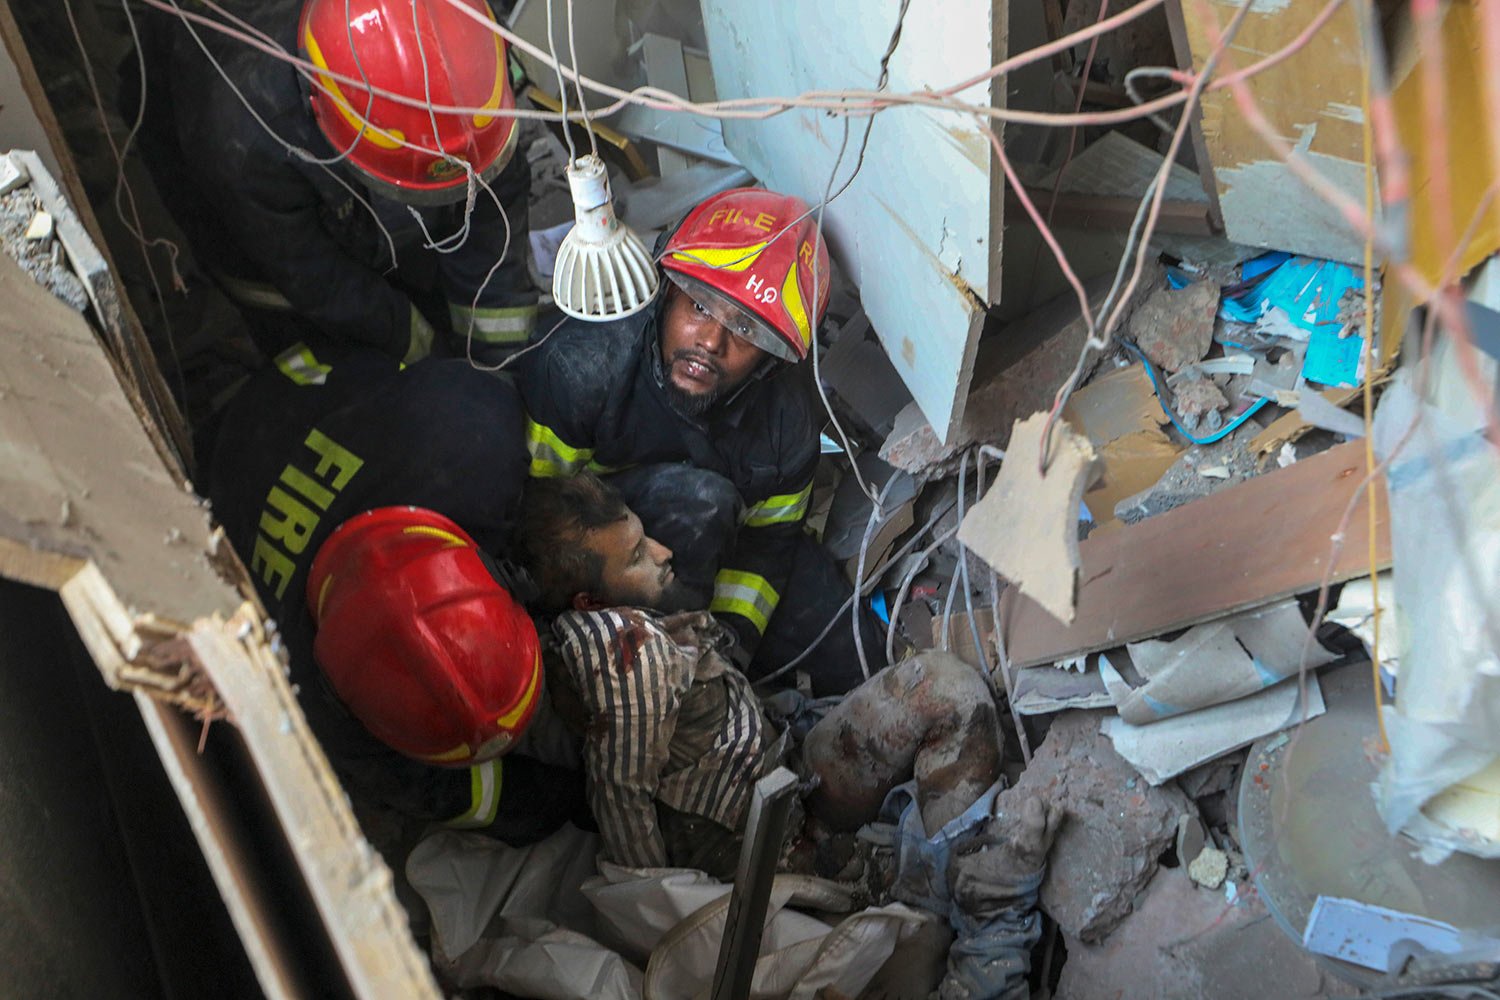  Fire officials rescue an injured person from the debris of a commercial building after an explosion, in Dhaka, Bangladesh, Tuesday, March 7, 2023.  (AP Photo/Abdul Goni) 